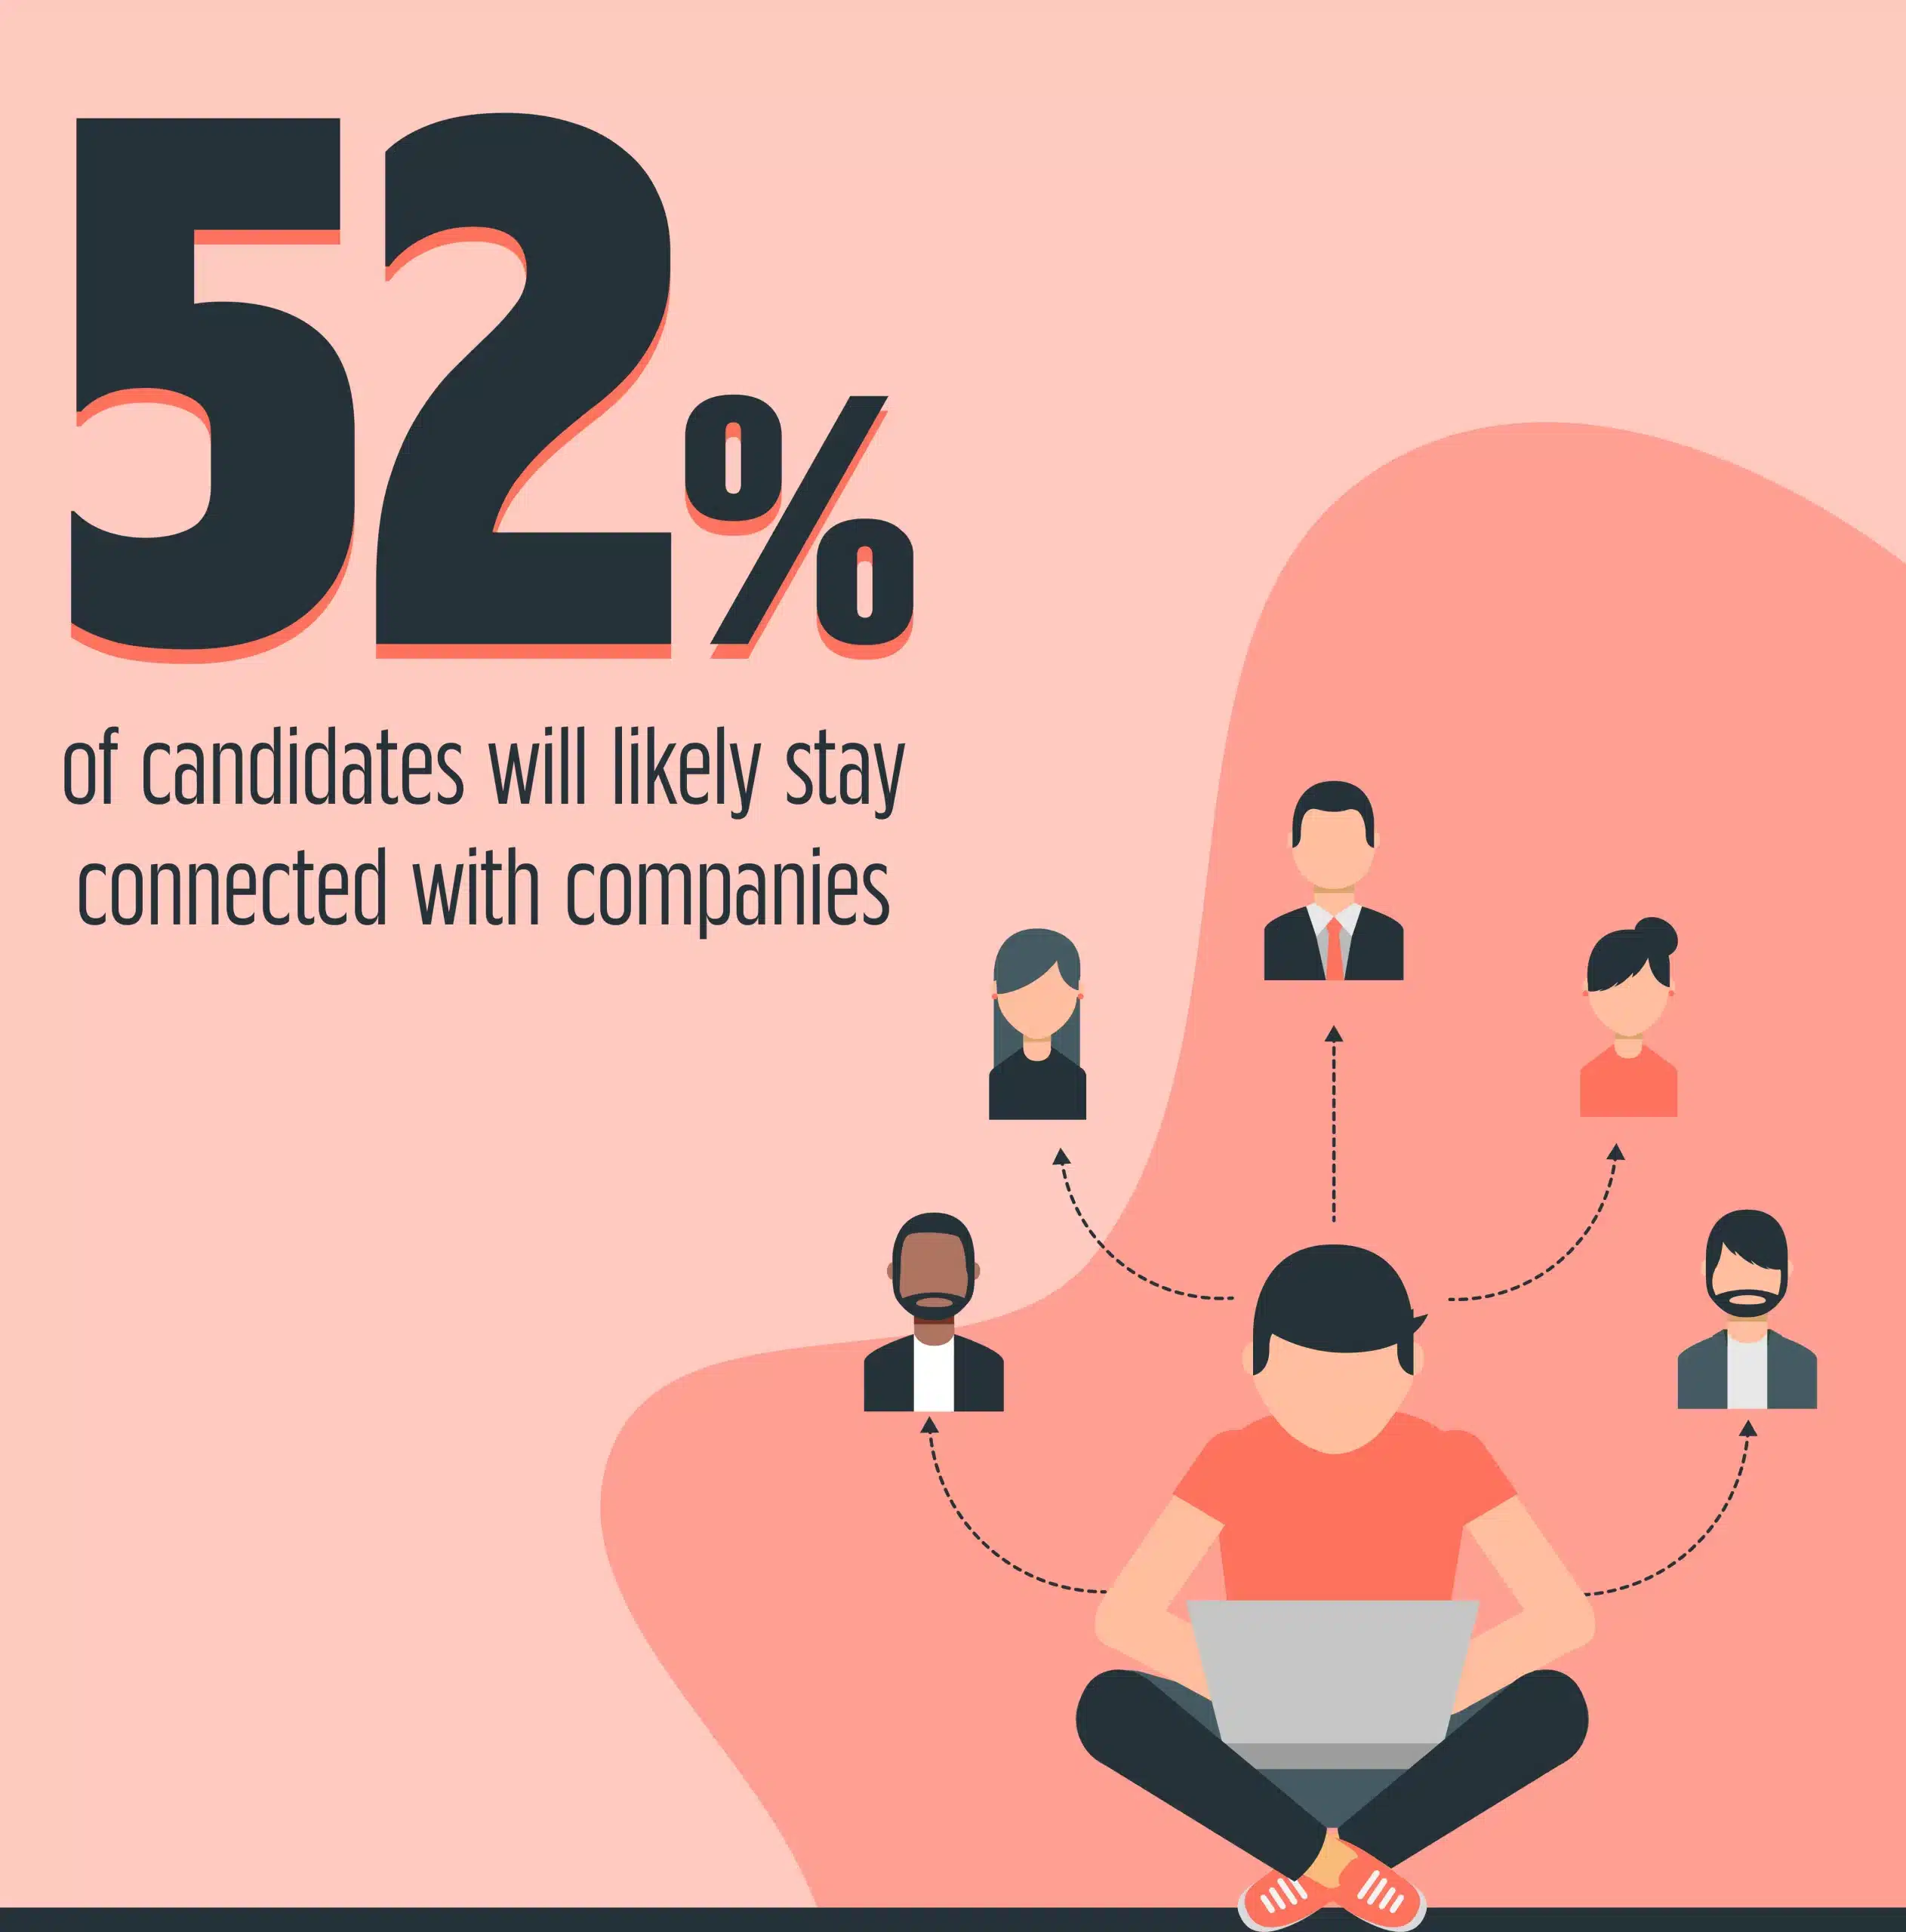 52% of candidates will likely stay connected with companies